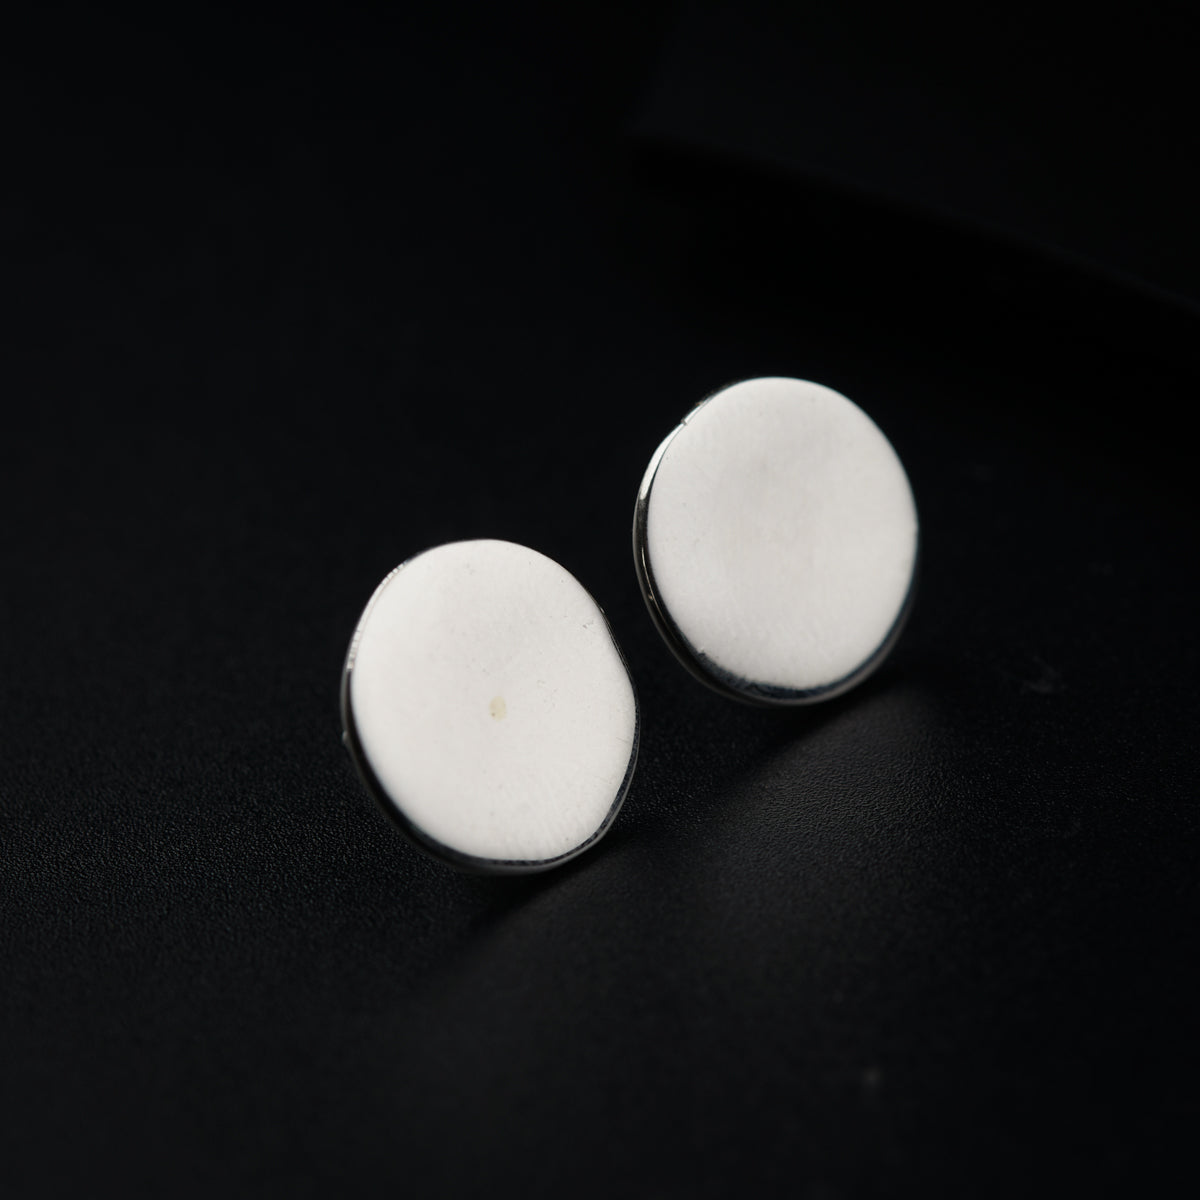 a pair of white buttons sitting on top of a black surface